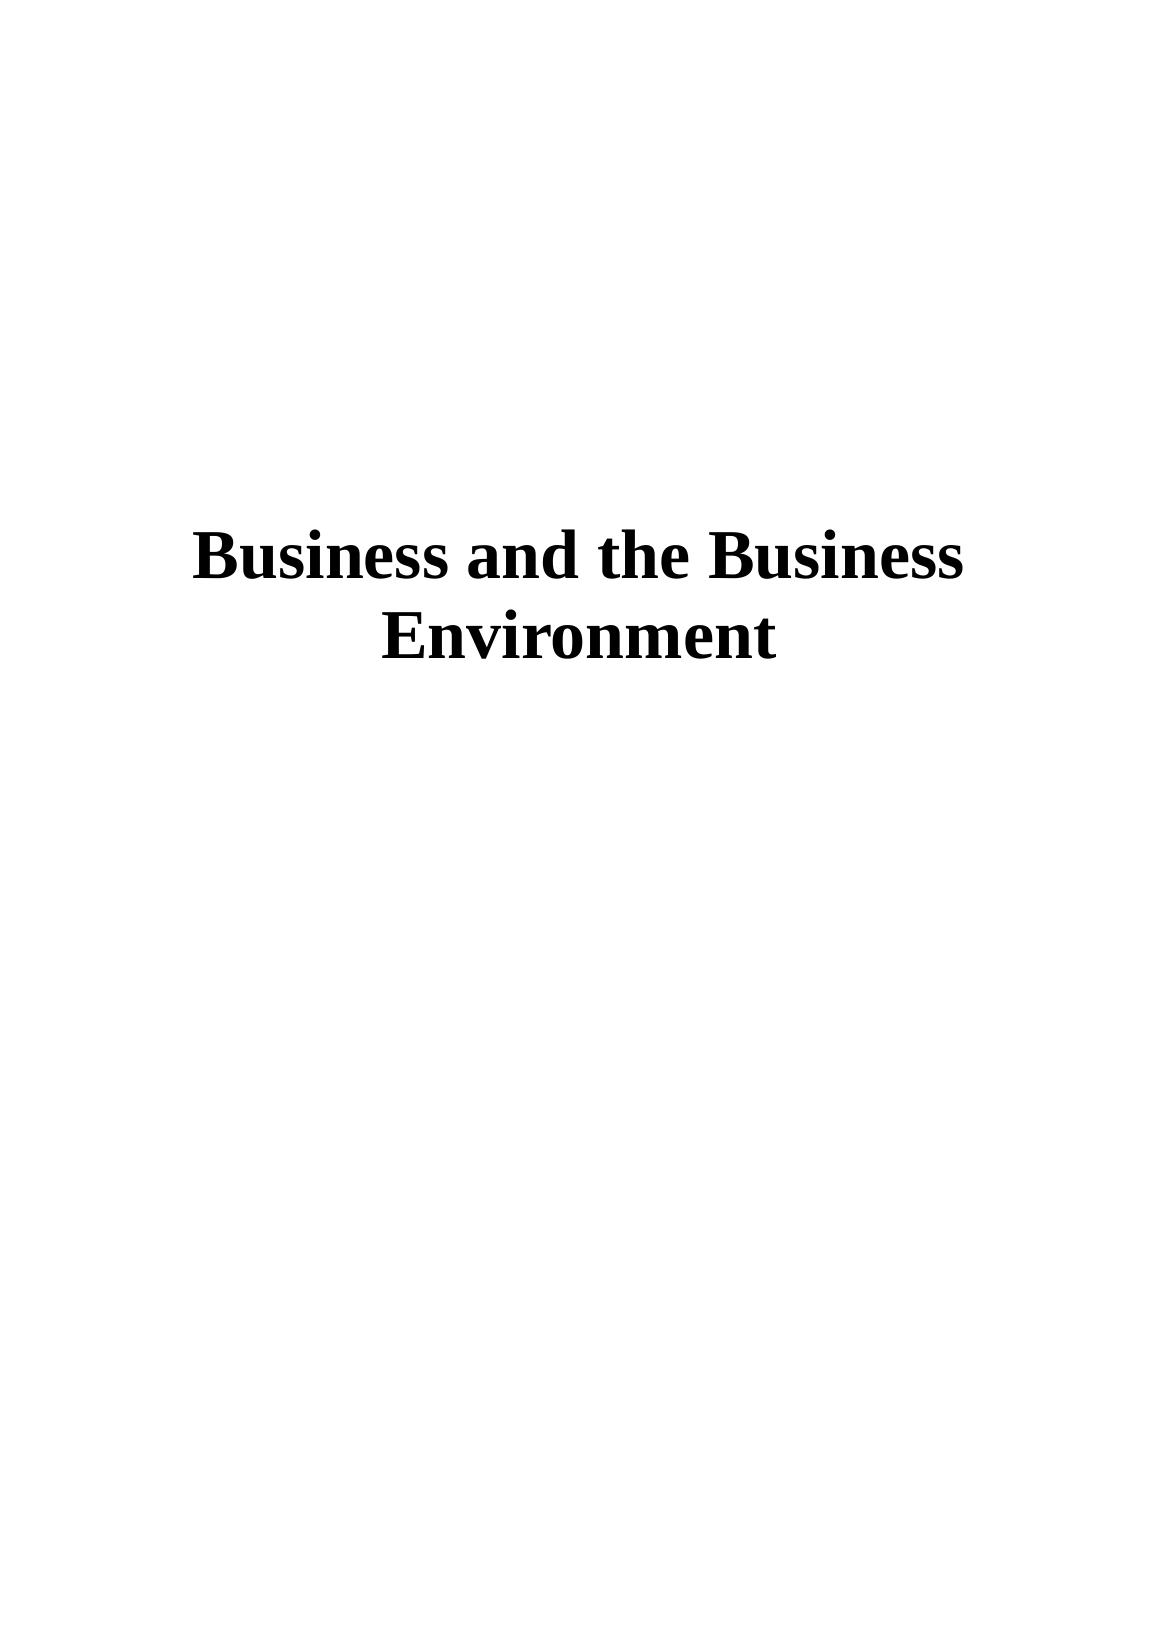 Business and the Business Environment Assignment Solution_1